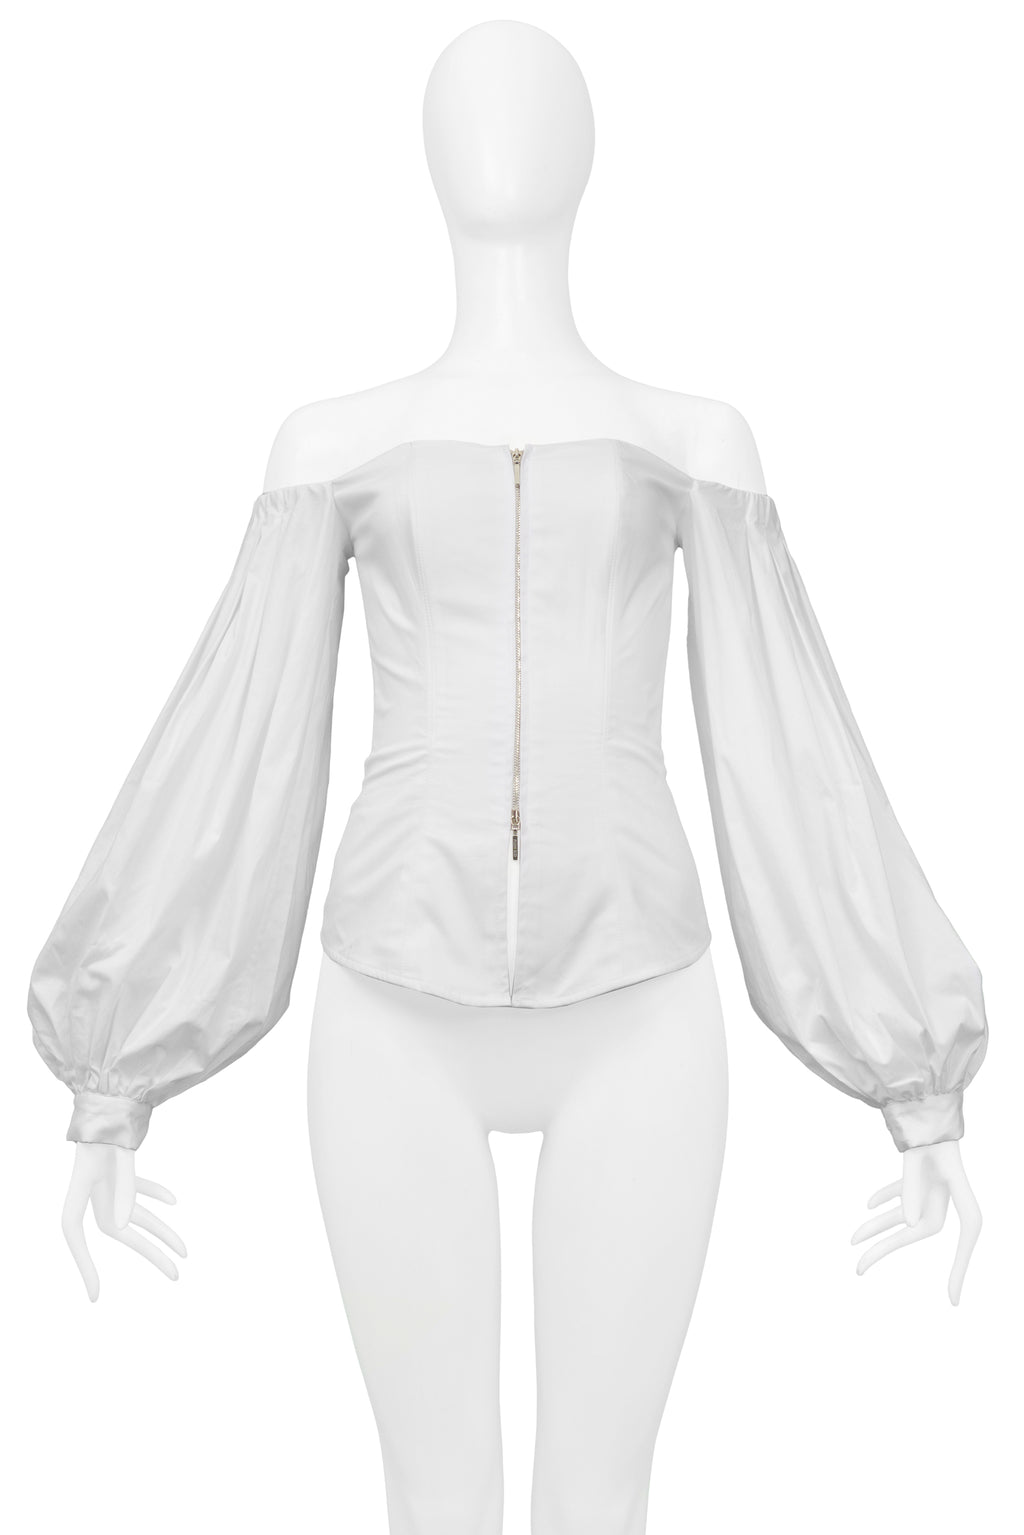 Beverly Long Sleeve Top White  Long sleeve tops, White corset top, Corsets  and bustiers